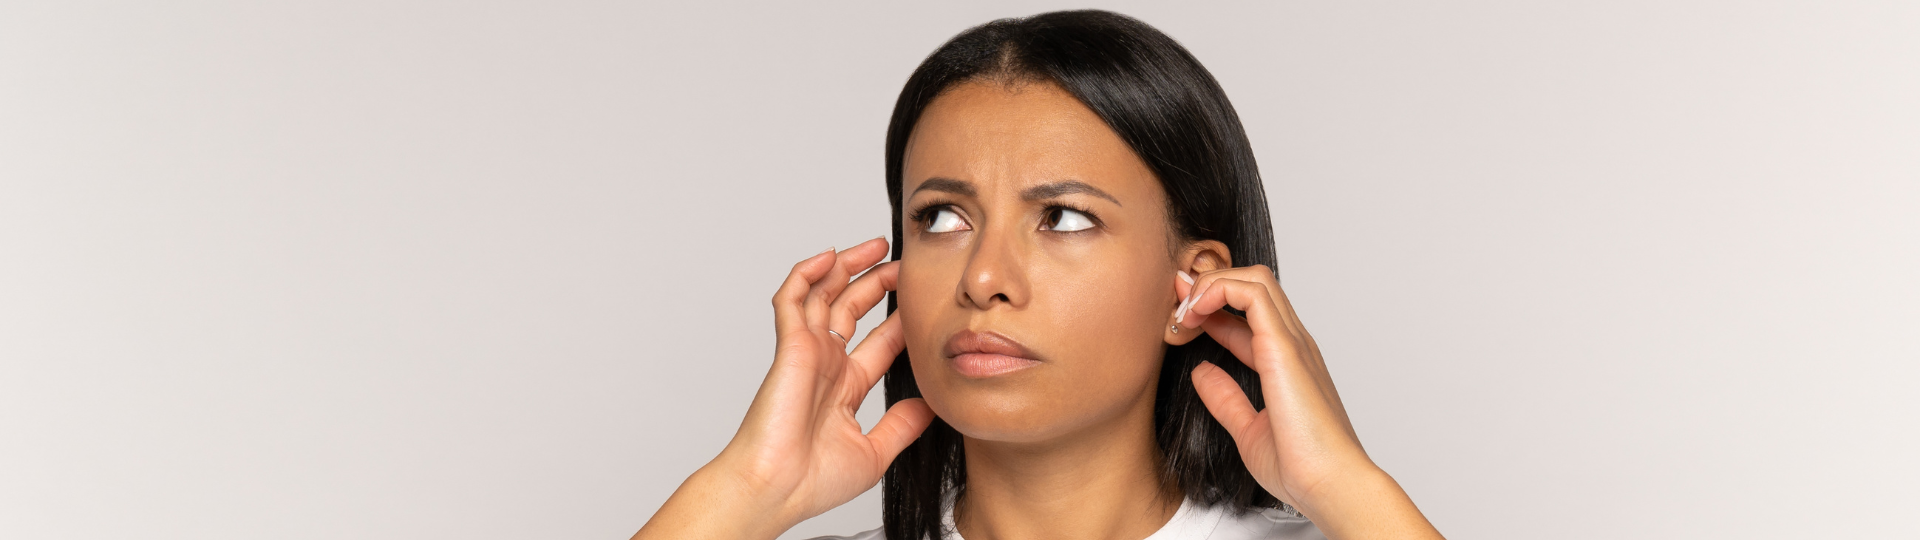 woman with tinnitus holding her ears